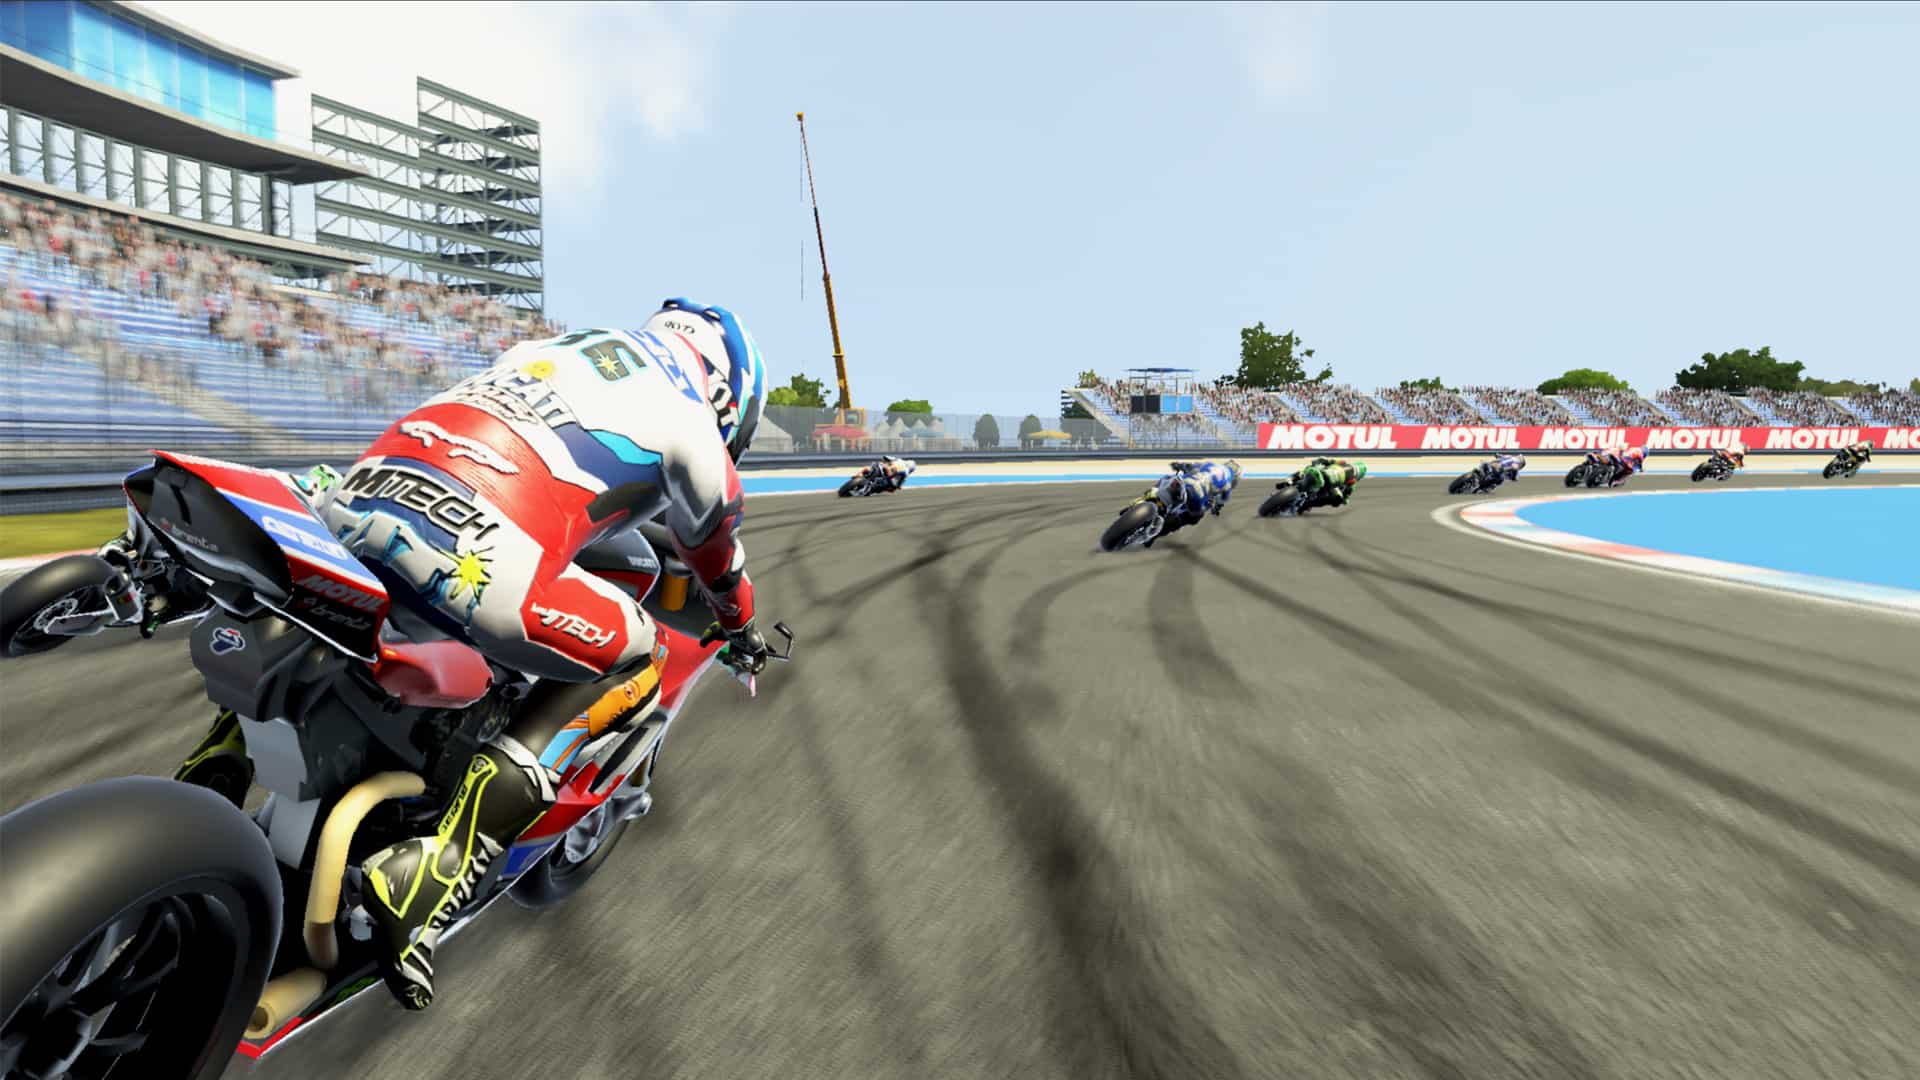 The new SBK Official Mobile Game is now available